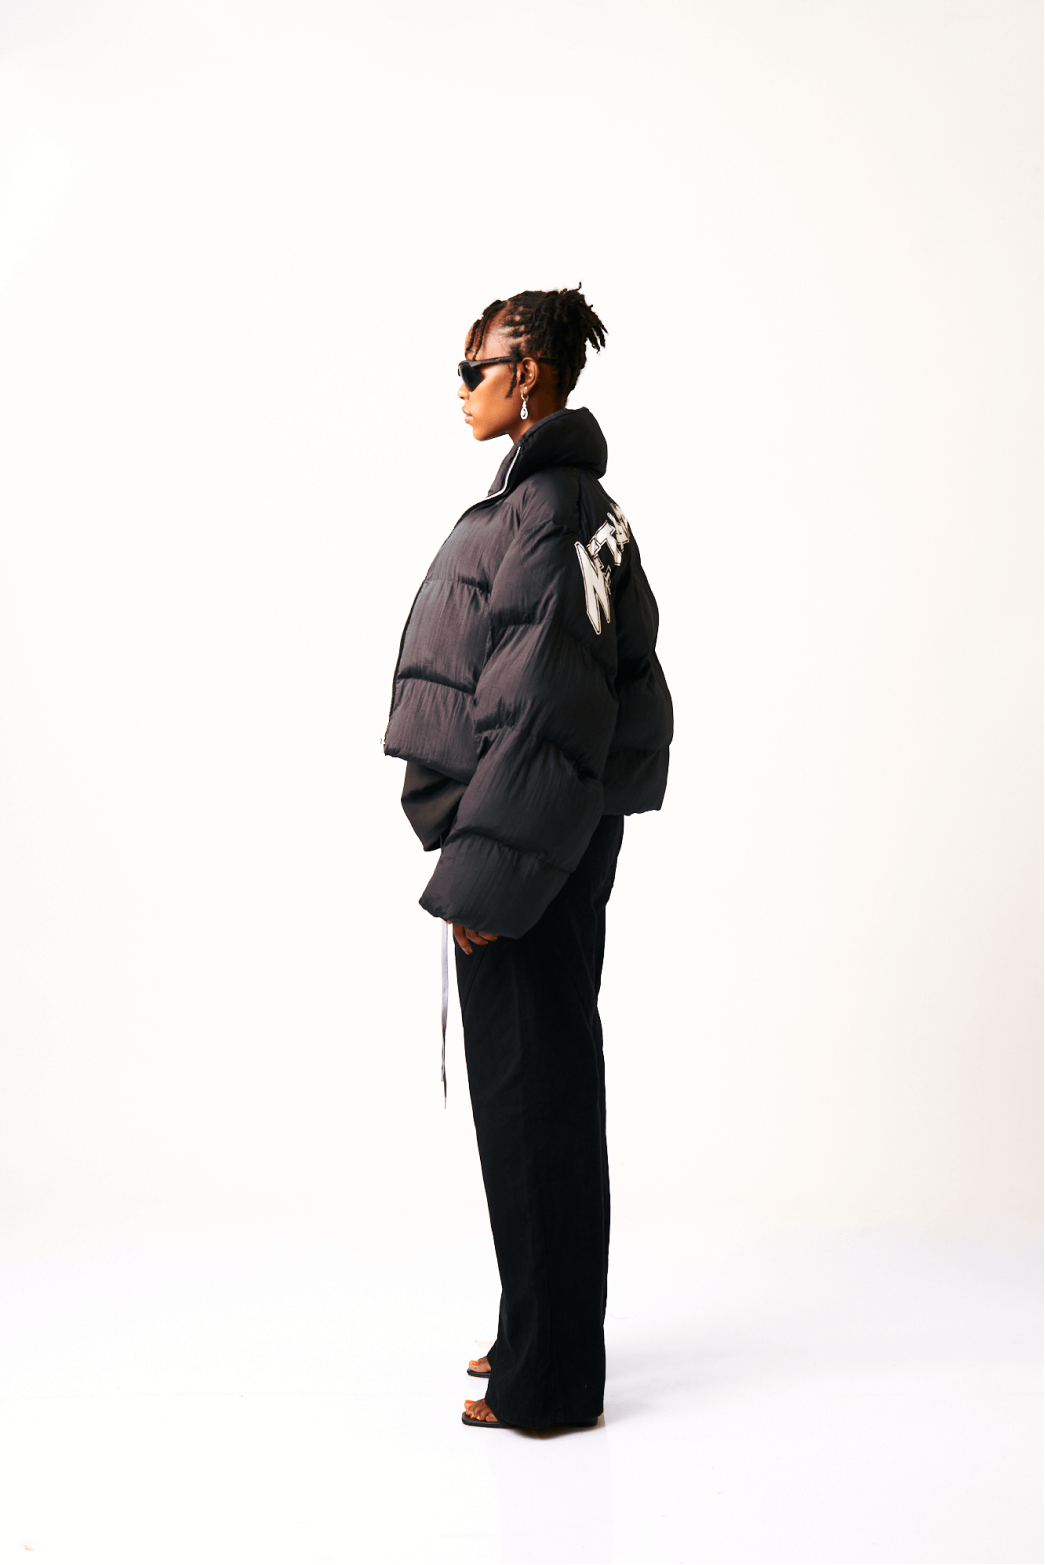 Shop Cropped Punk Puffer Jacket by Metamorphisized on Arrai. Discover stylish, affordable clothing, jewelry, handbags and unique handmade pieces from top Kenyan & African fashion brands prioritising sustainability and quality craftsmanship.